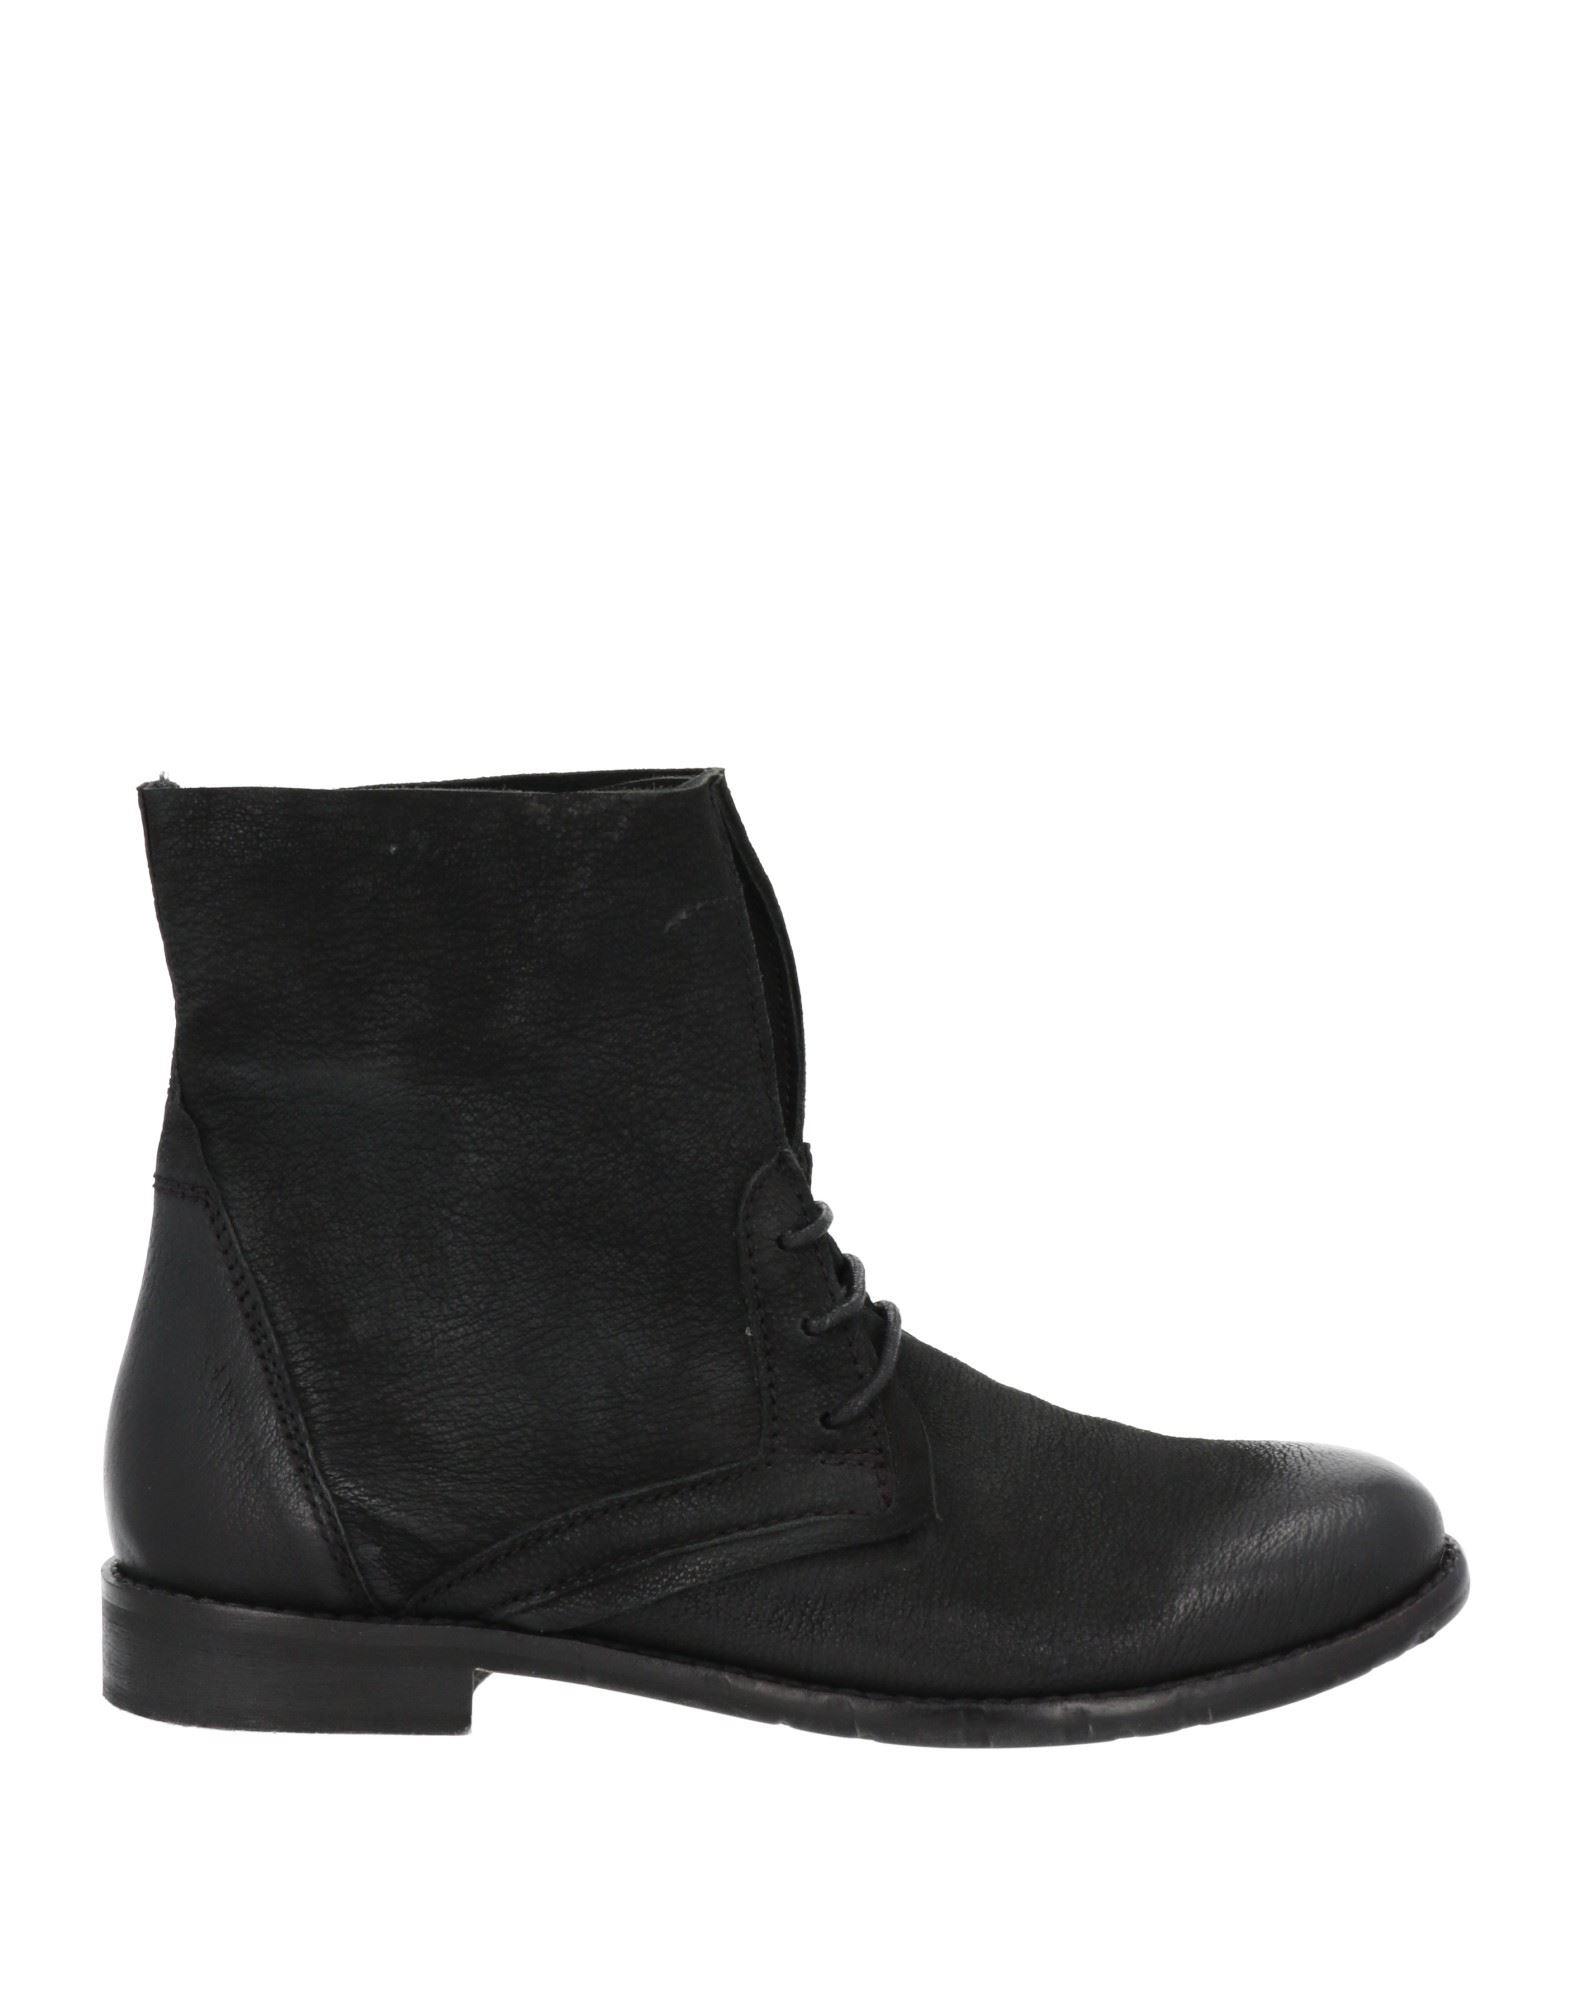 Inuovo Ankle Boots in Black | Lyst